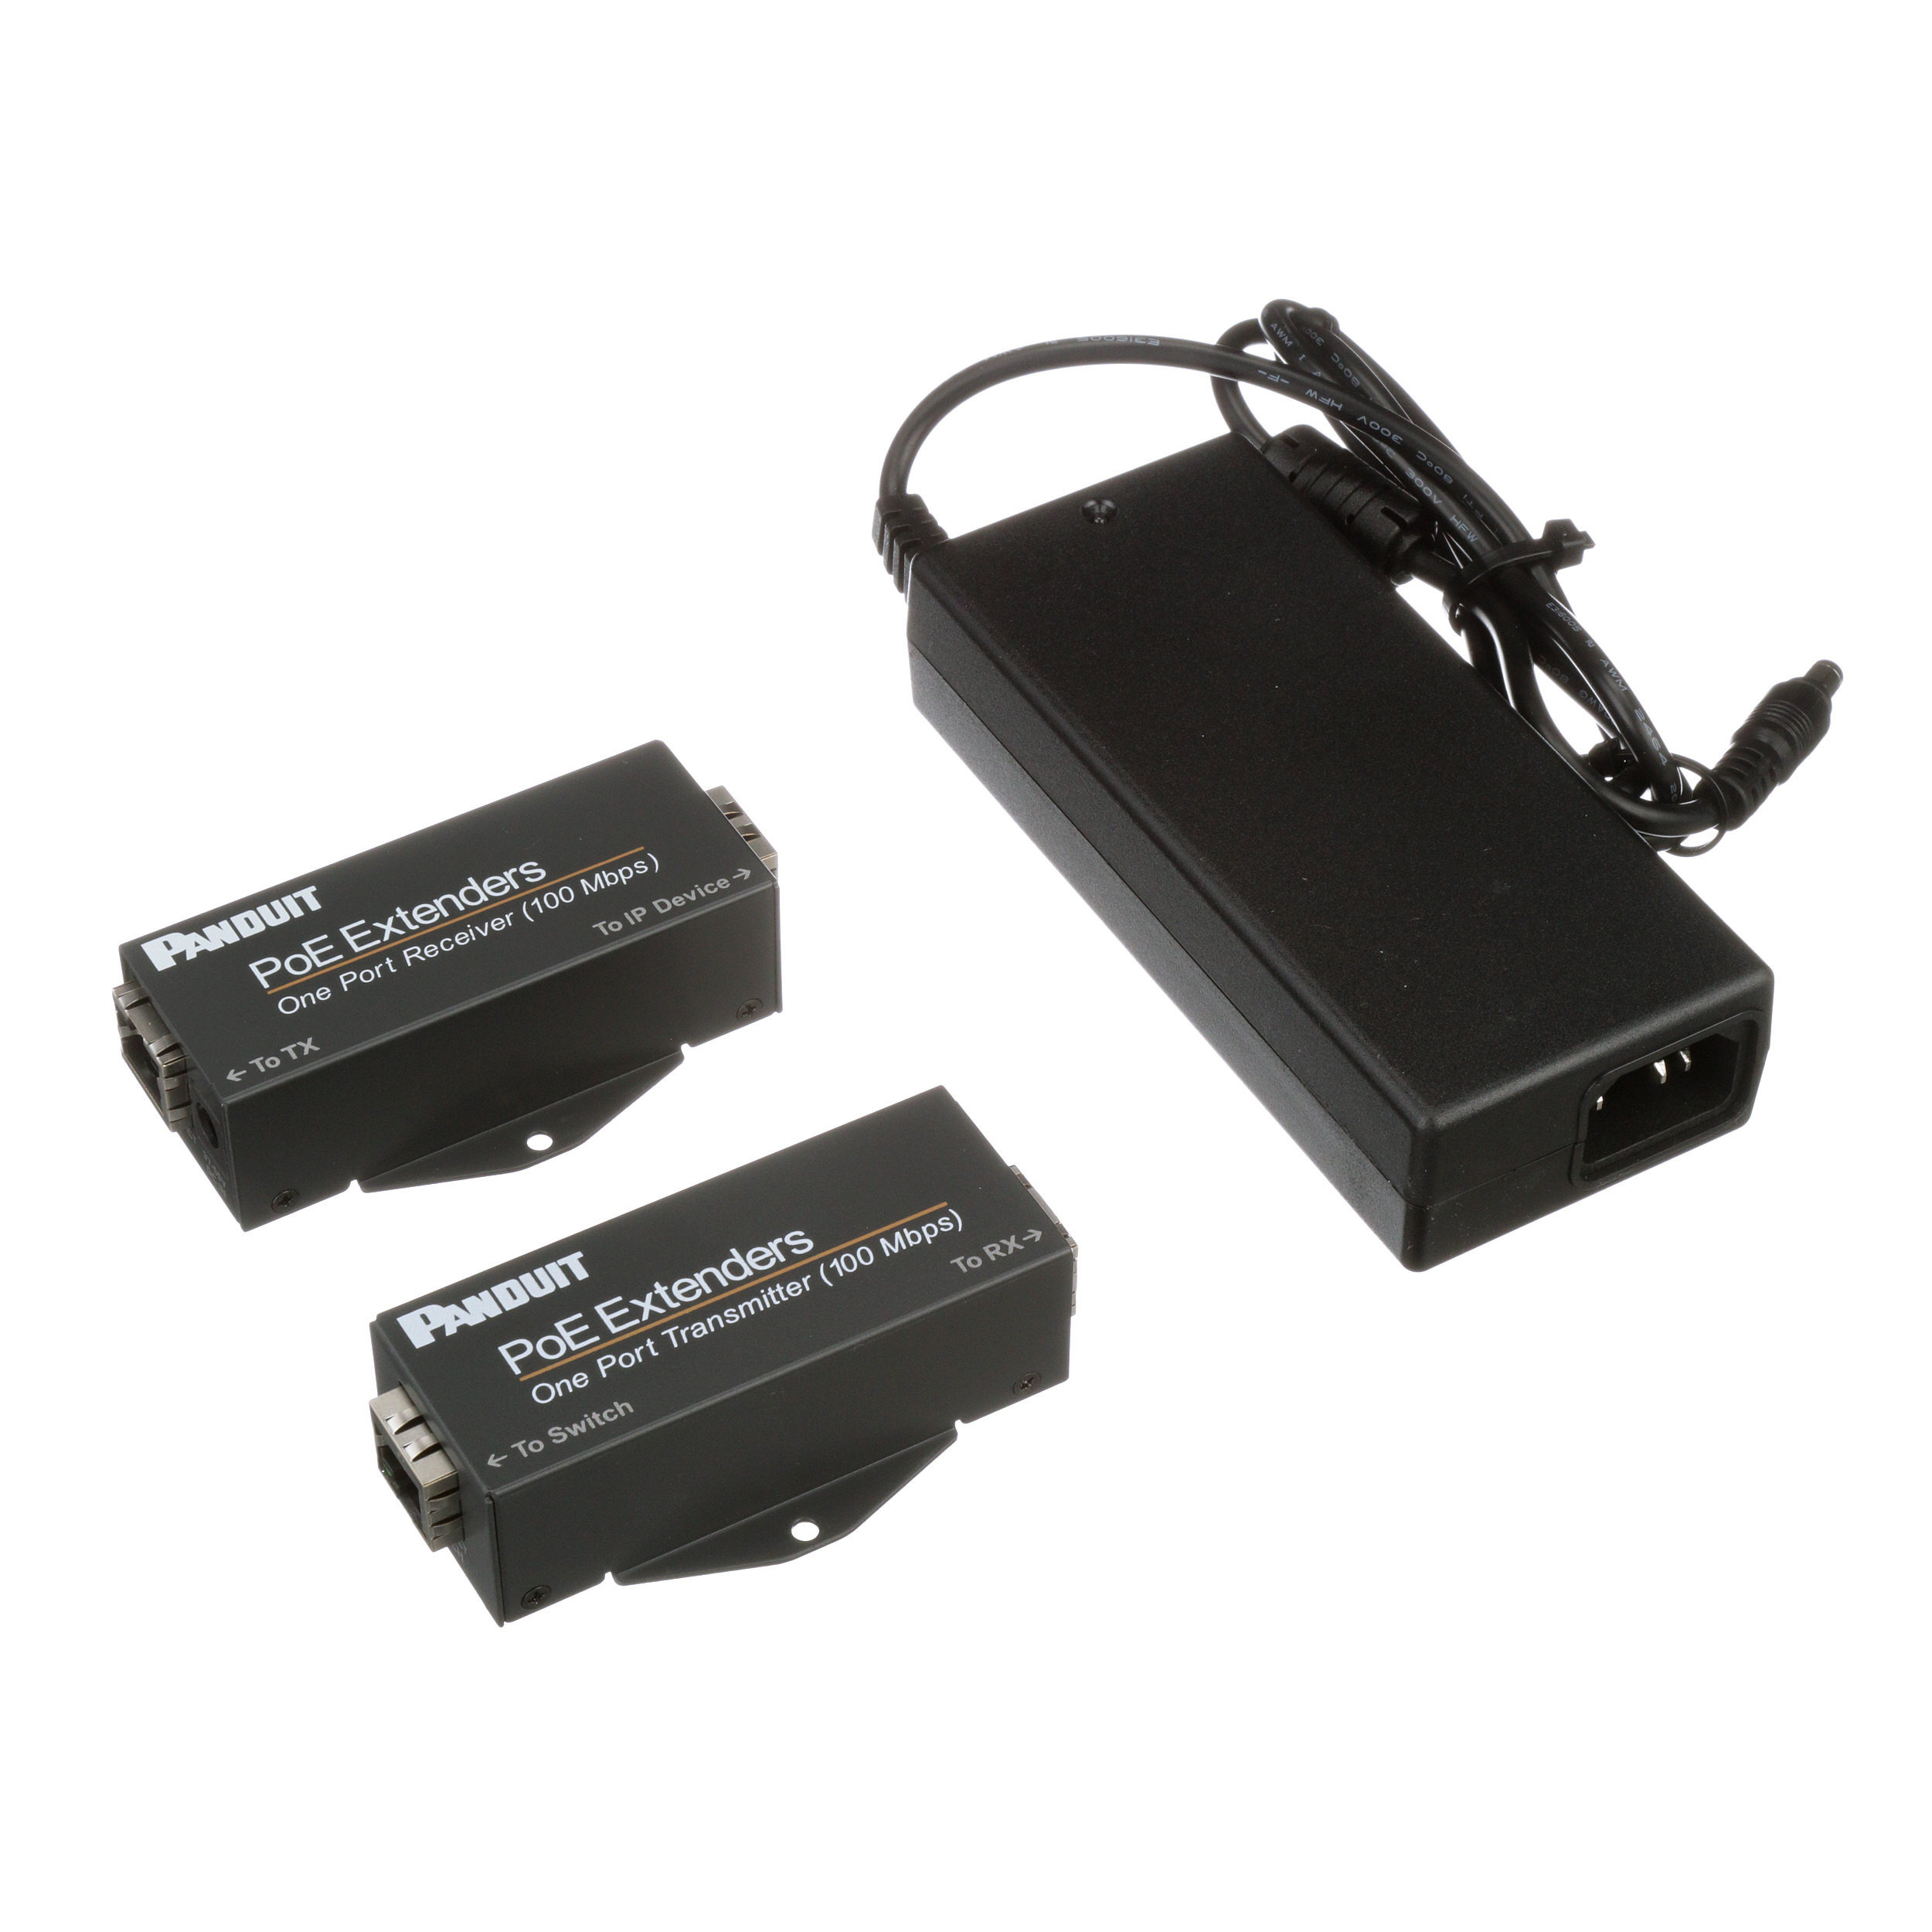 PoE Extender Kit with 1 Port Tx And Rx B